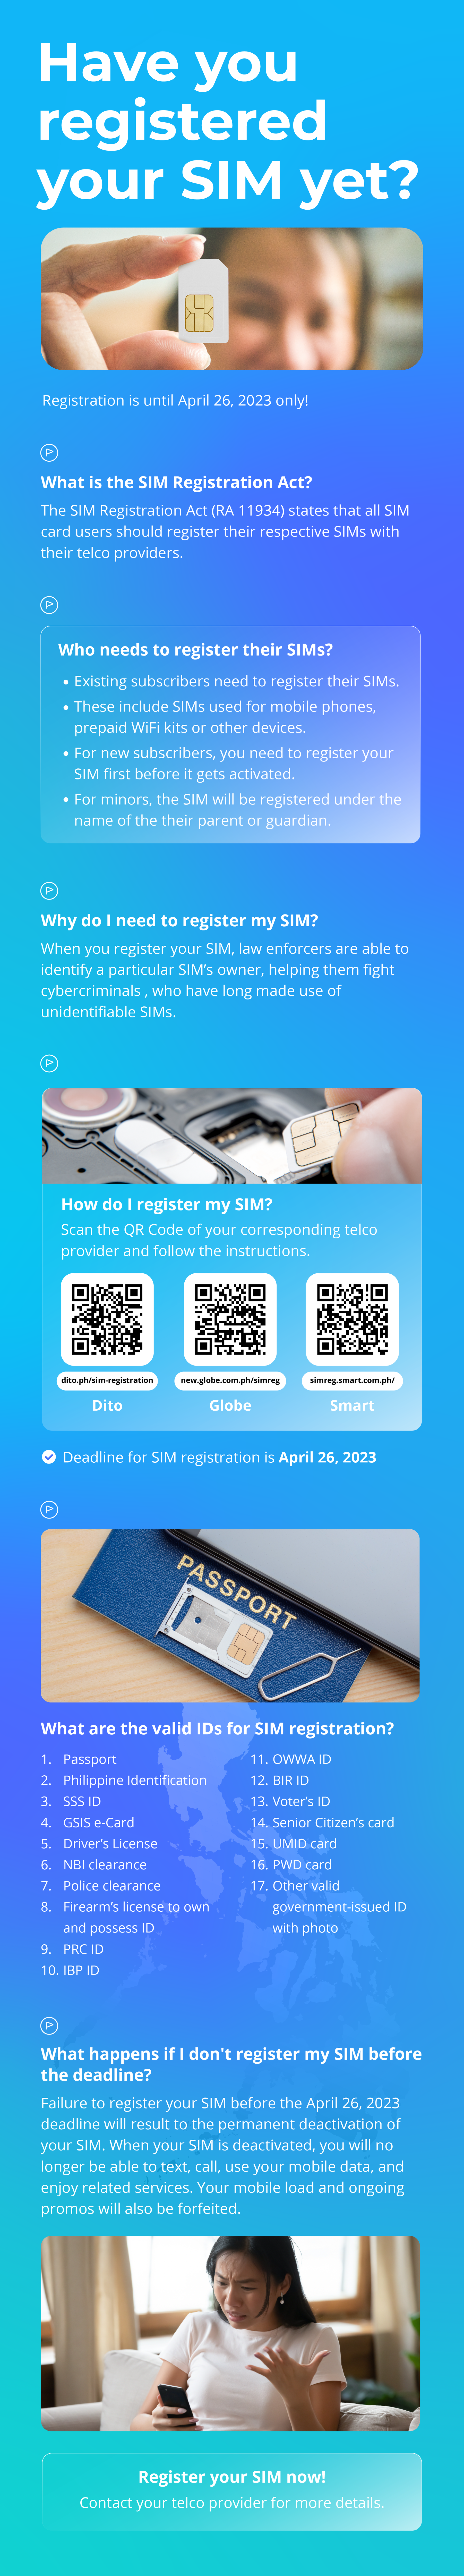 How to register your SIM